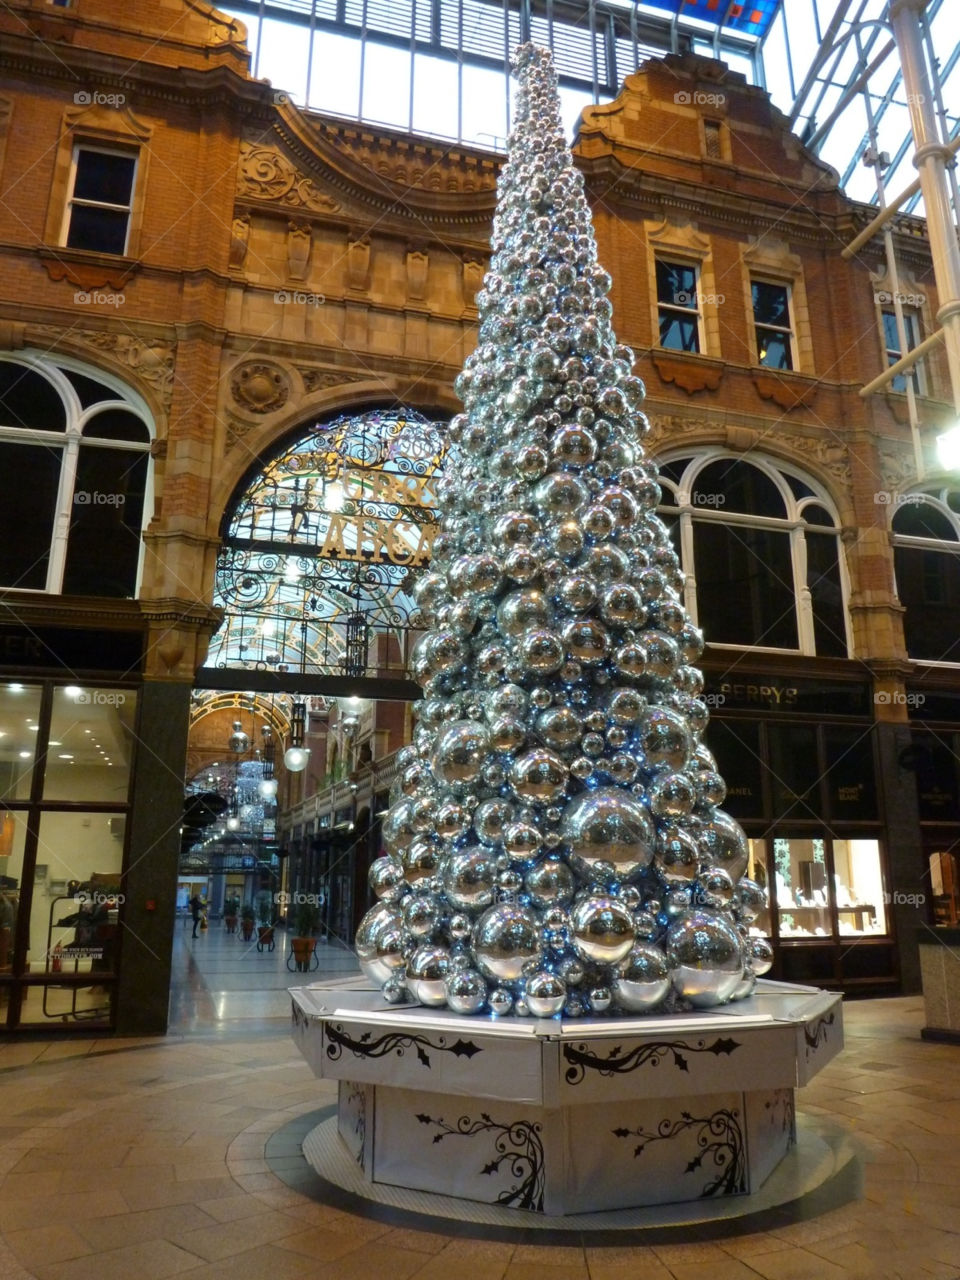 leeds tree christmas silver by Bea